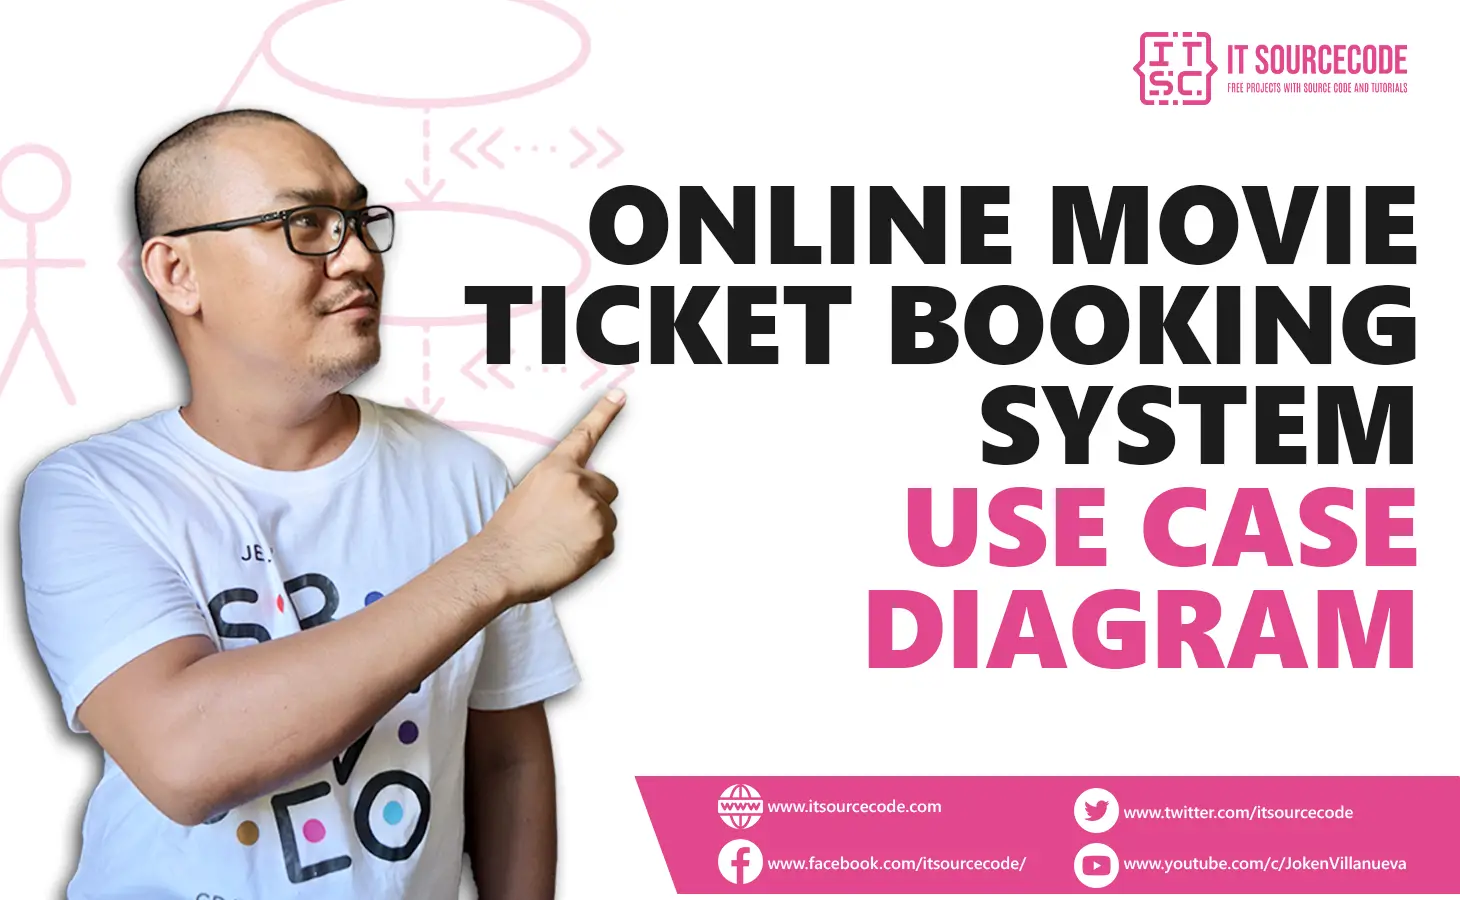 Online Movie Ticket Booking System Use Case Diagram